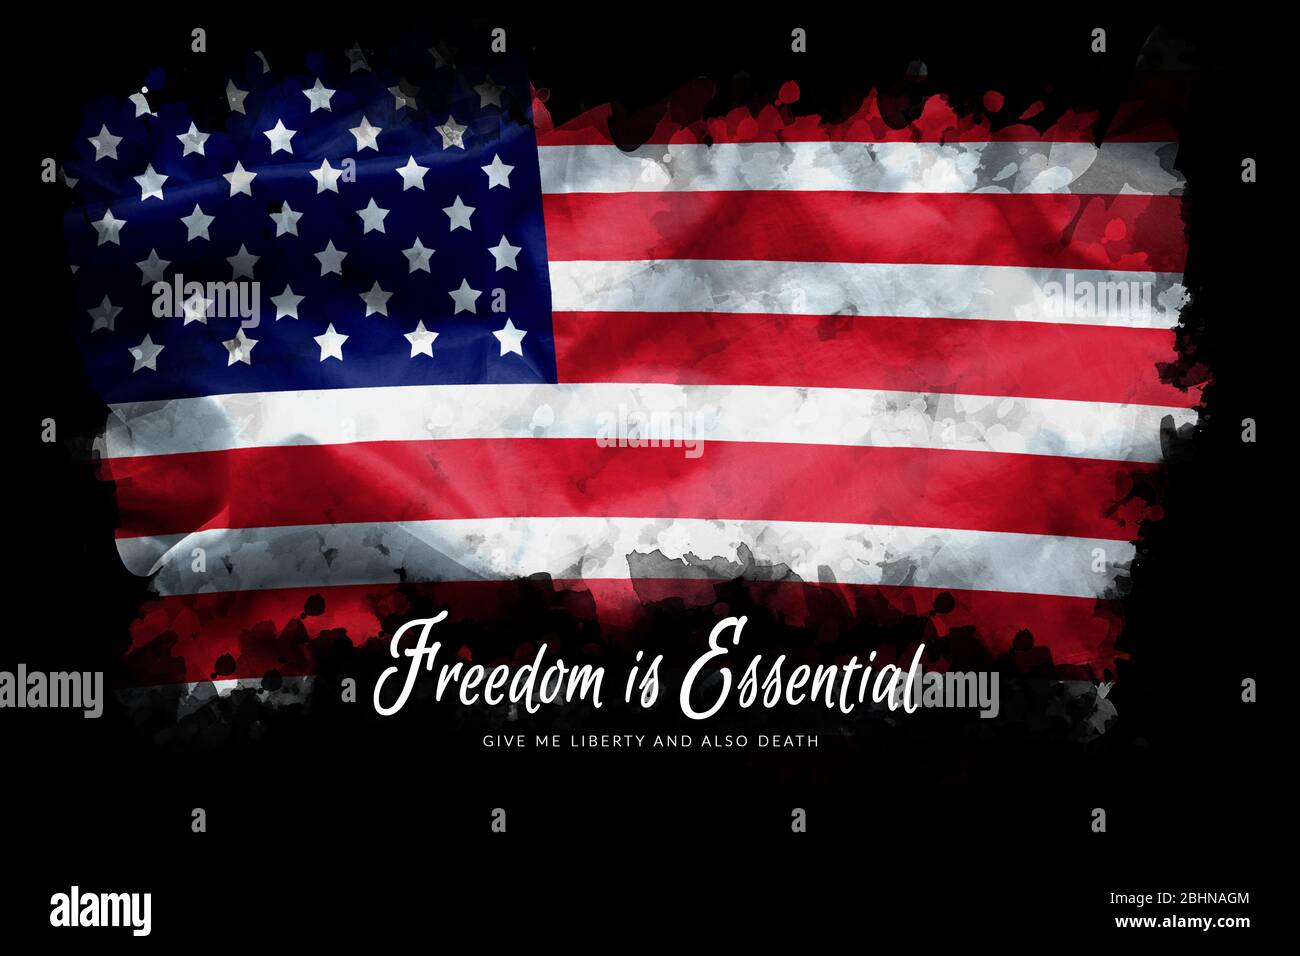 US anti-lockdown protests concept. text 'freedom is essential, give me liberty and also death' on America flag background, grunge style Stock Photo